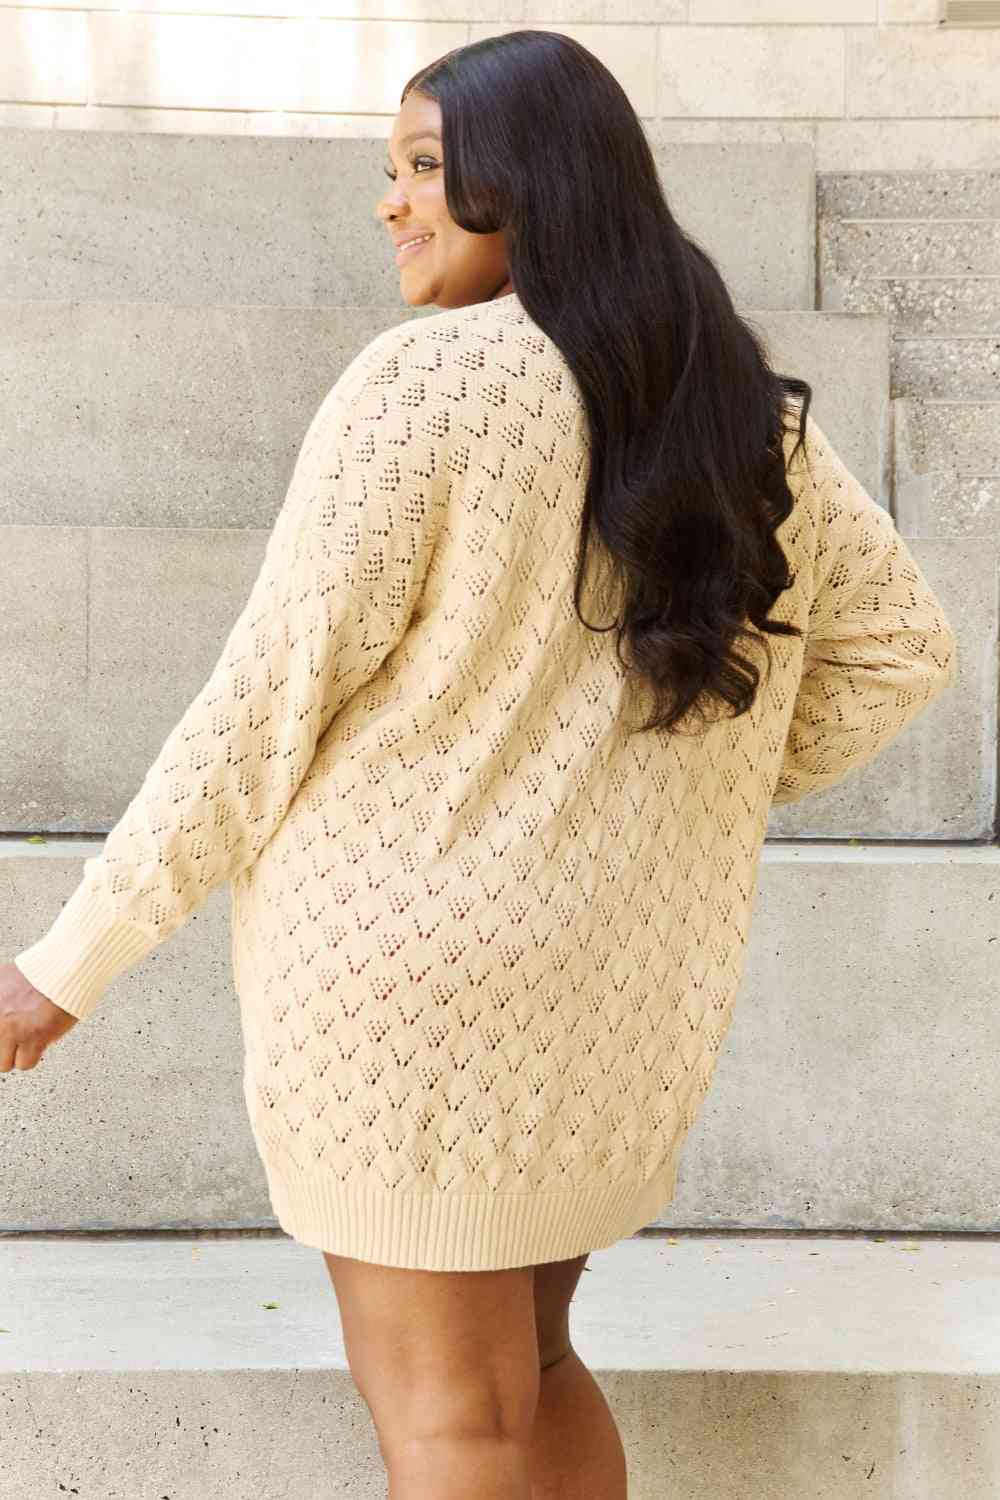 Breezy Days Full Size Open Front Sweater Cardigan - Sweaters - Shirts & Tops - 2 - 2024